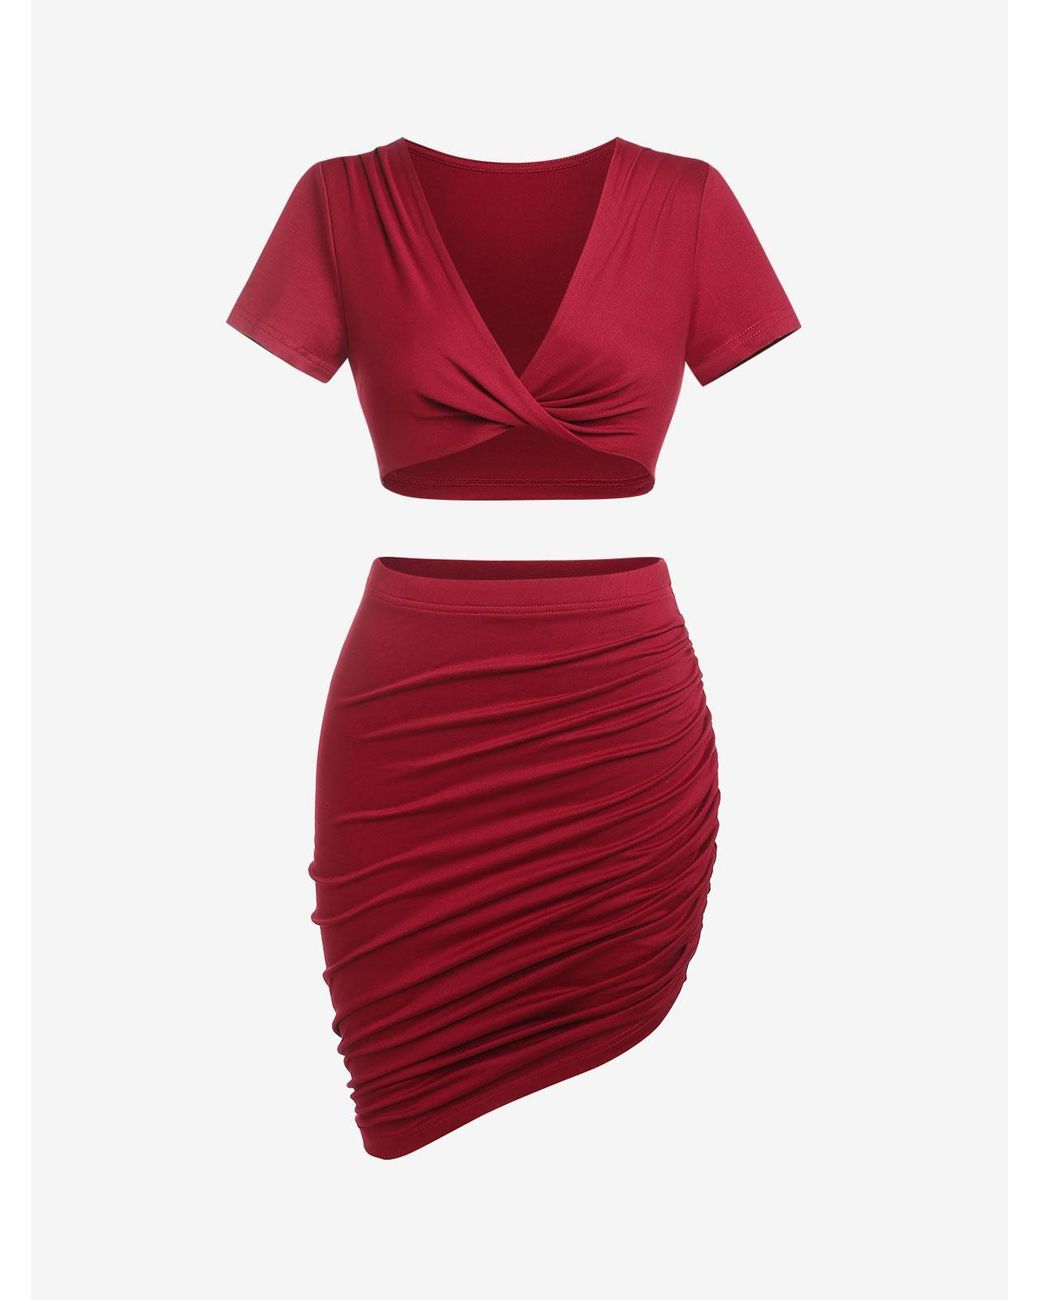 Zaful Co-ords Twisted Ruched Mini Bodycon Skirt Set in Deep Red (Red) | Lyst